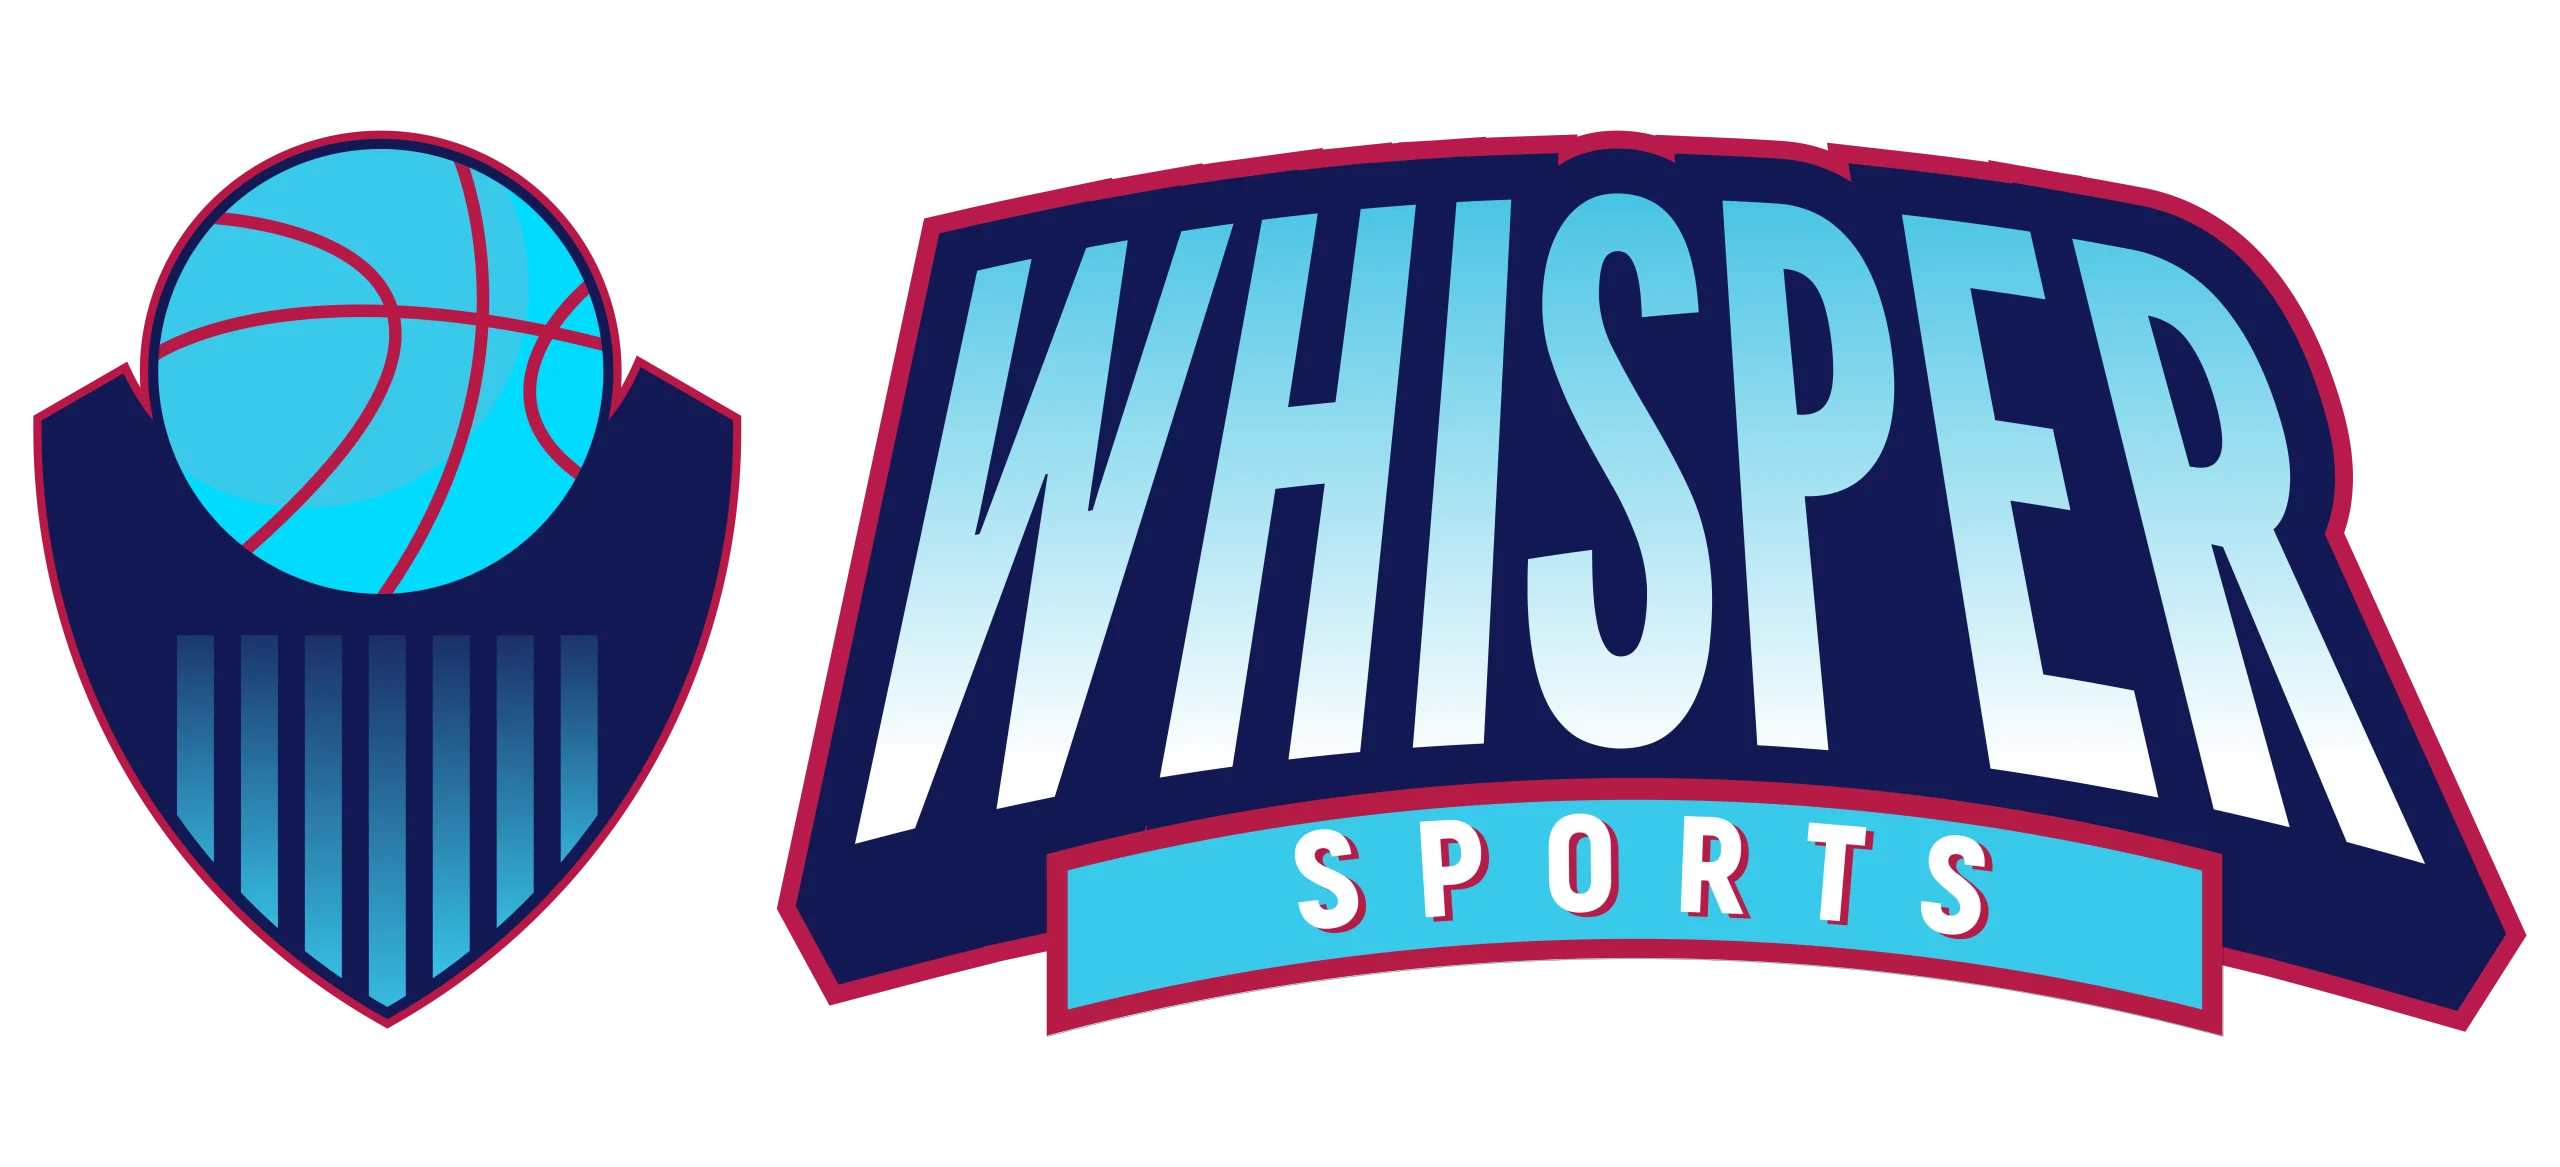 Whisper Sports – Elevate Your Game in Silence